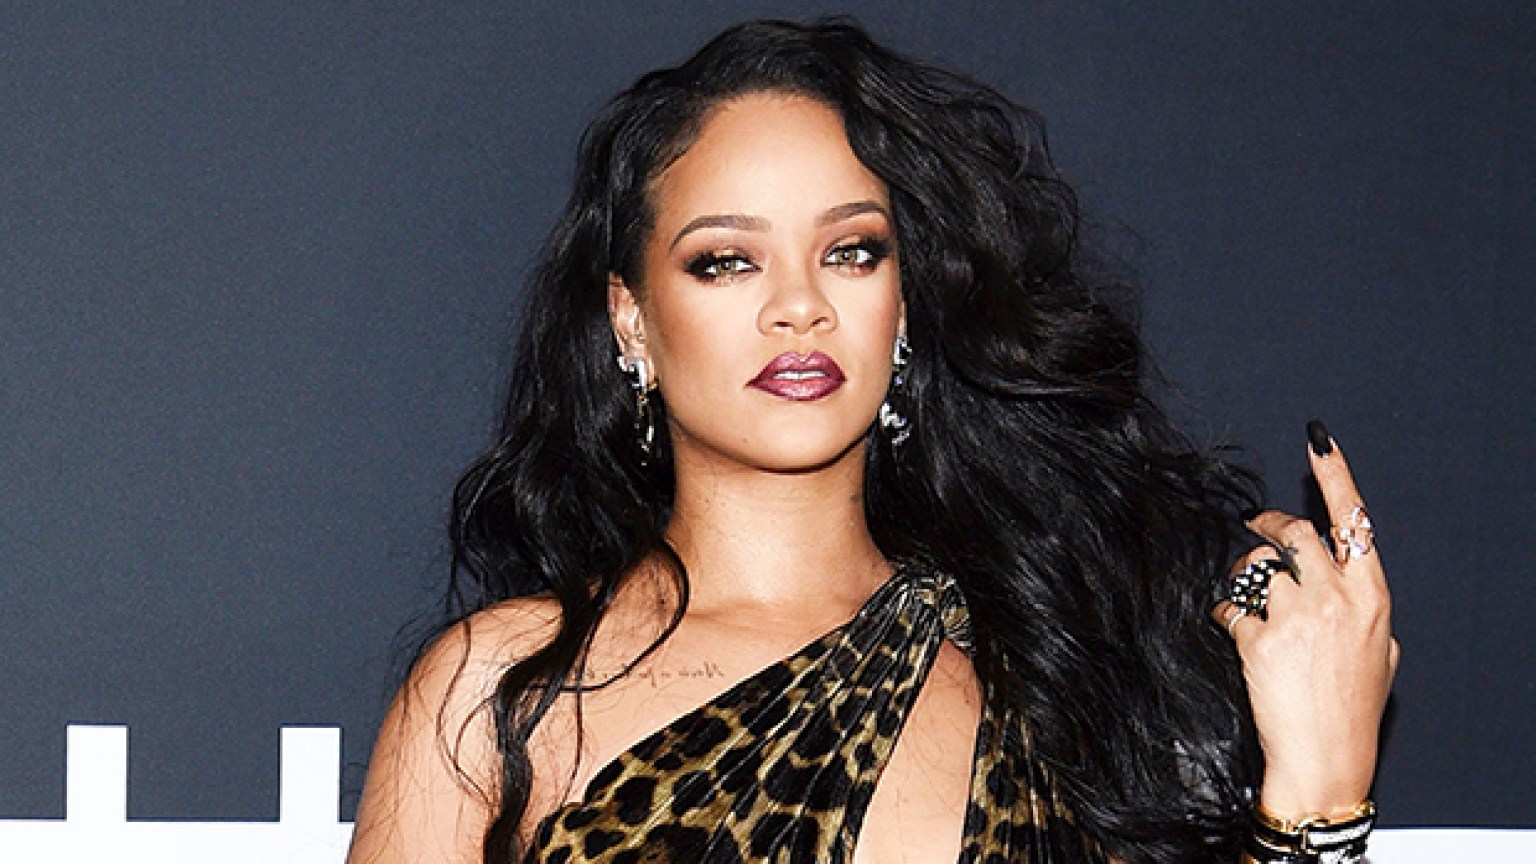 Pics Rihanna Topless In Brazil Riri Bares All On Beach For Vogue Photo Shoot Hollywood Life